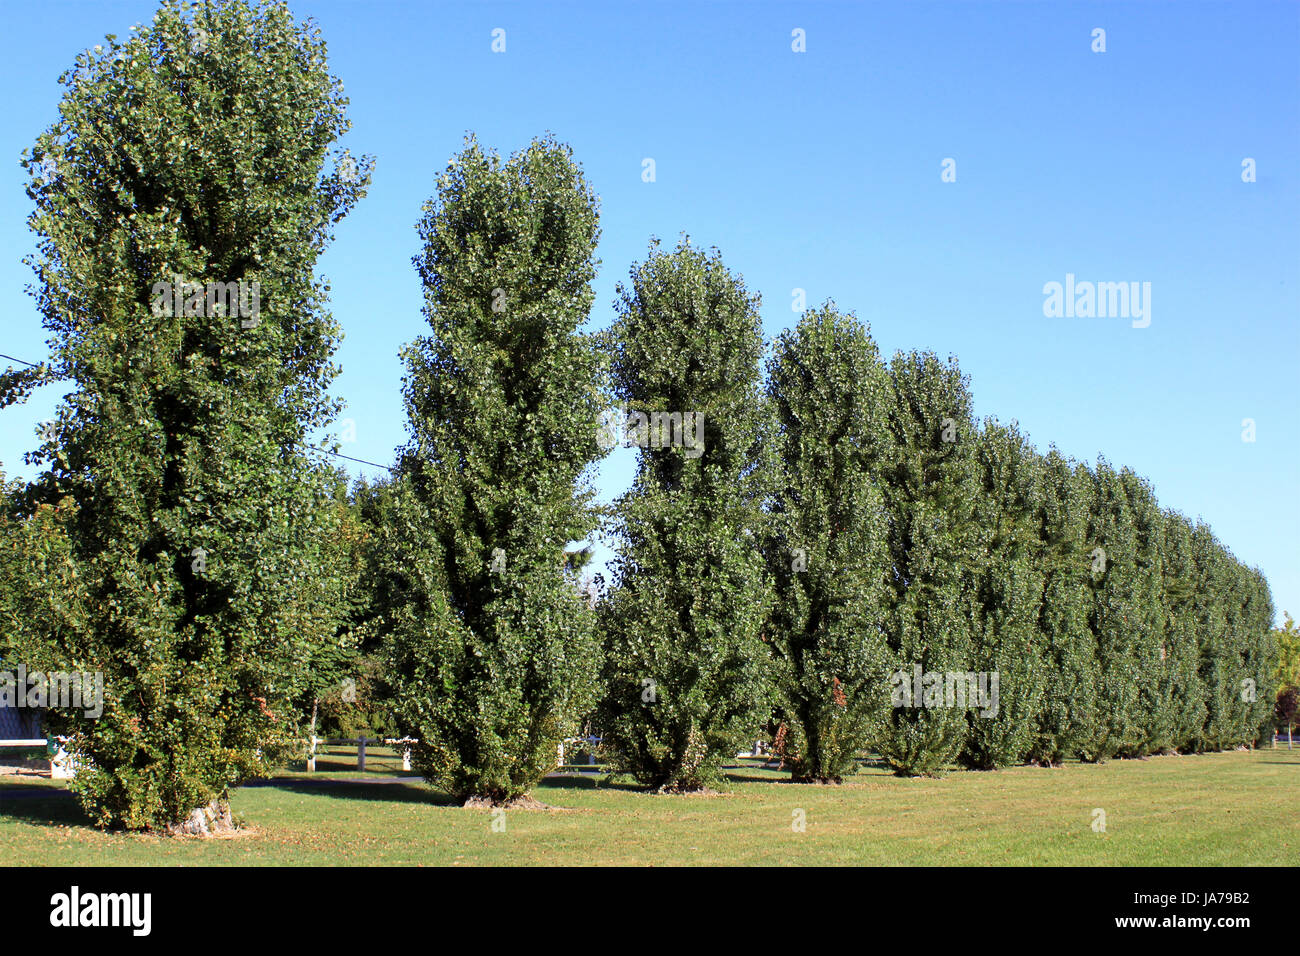 tree, trees, park, garden, leaves, ecology, ecological, alignment, foliage, Stock Photo